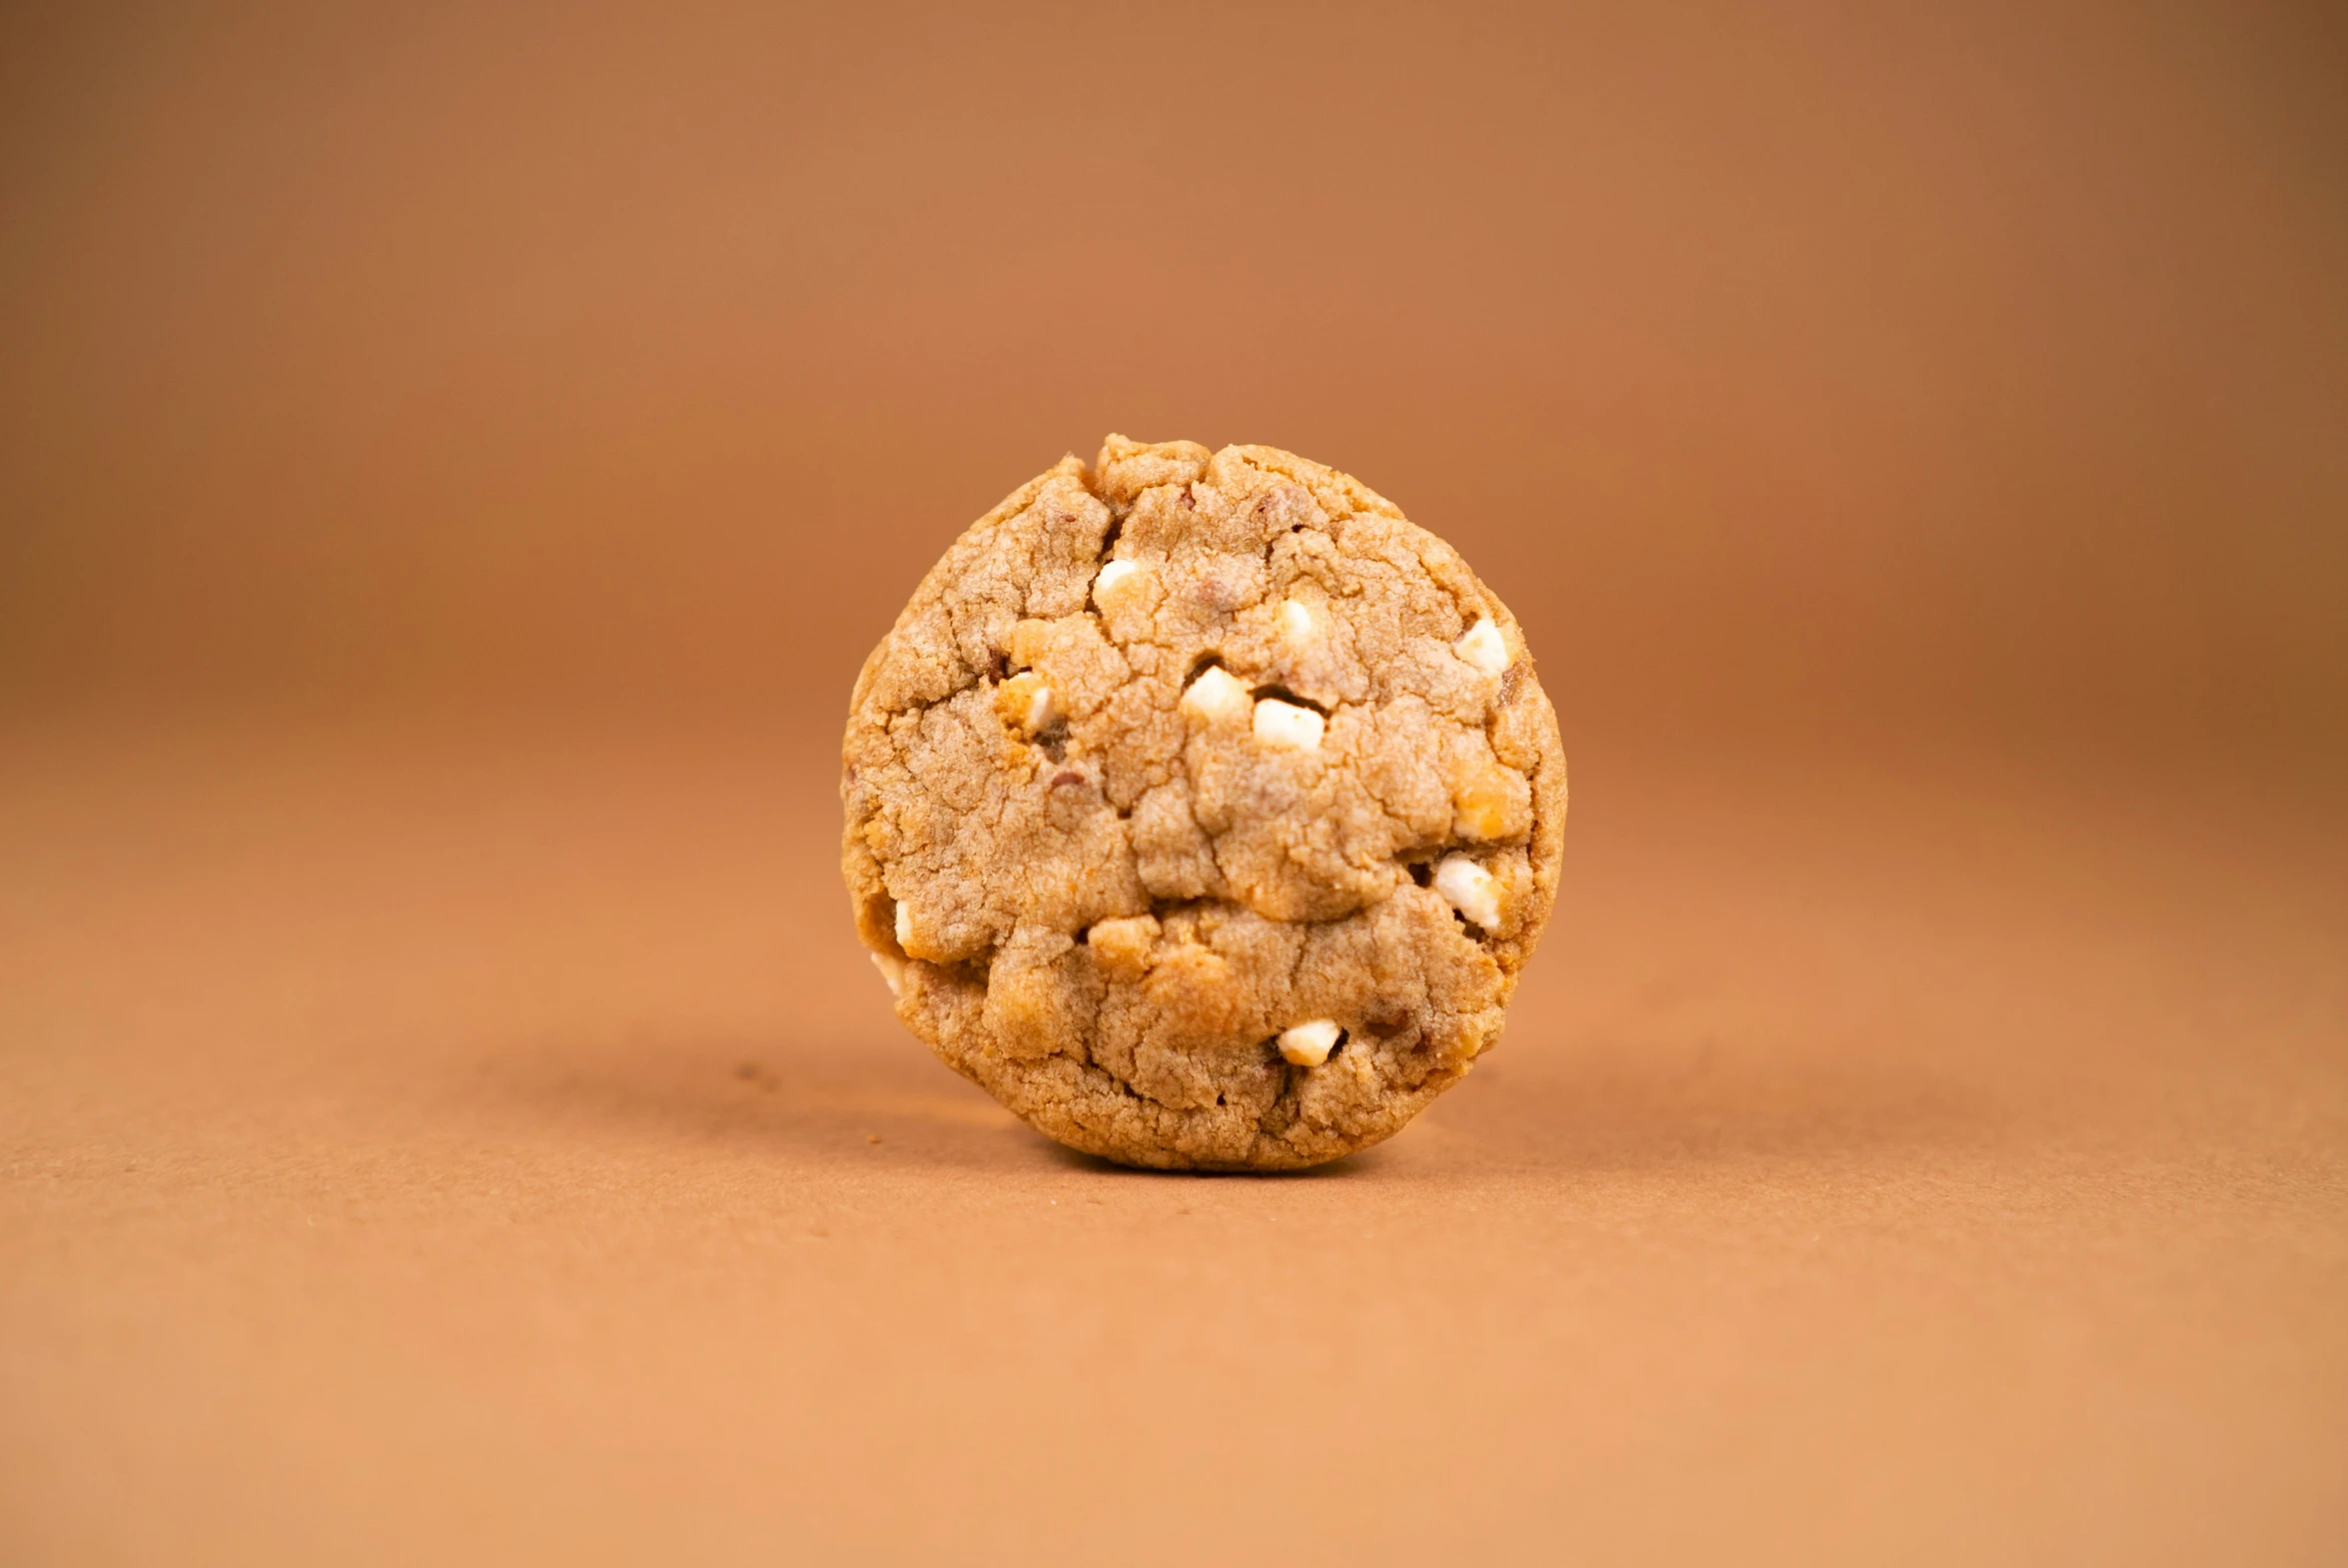 a close - up view of a round cookie with some nuts on top